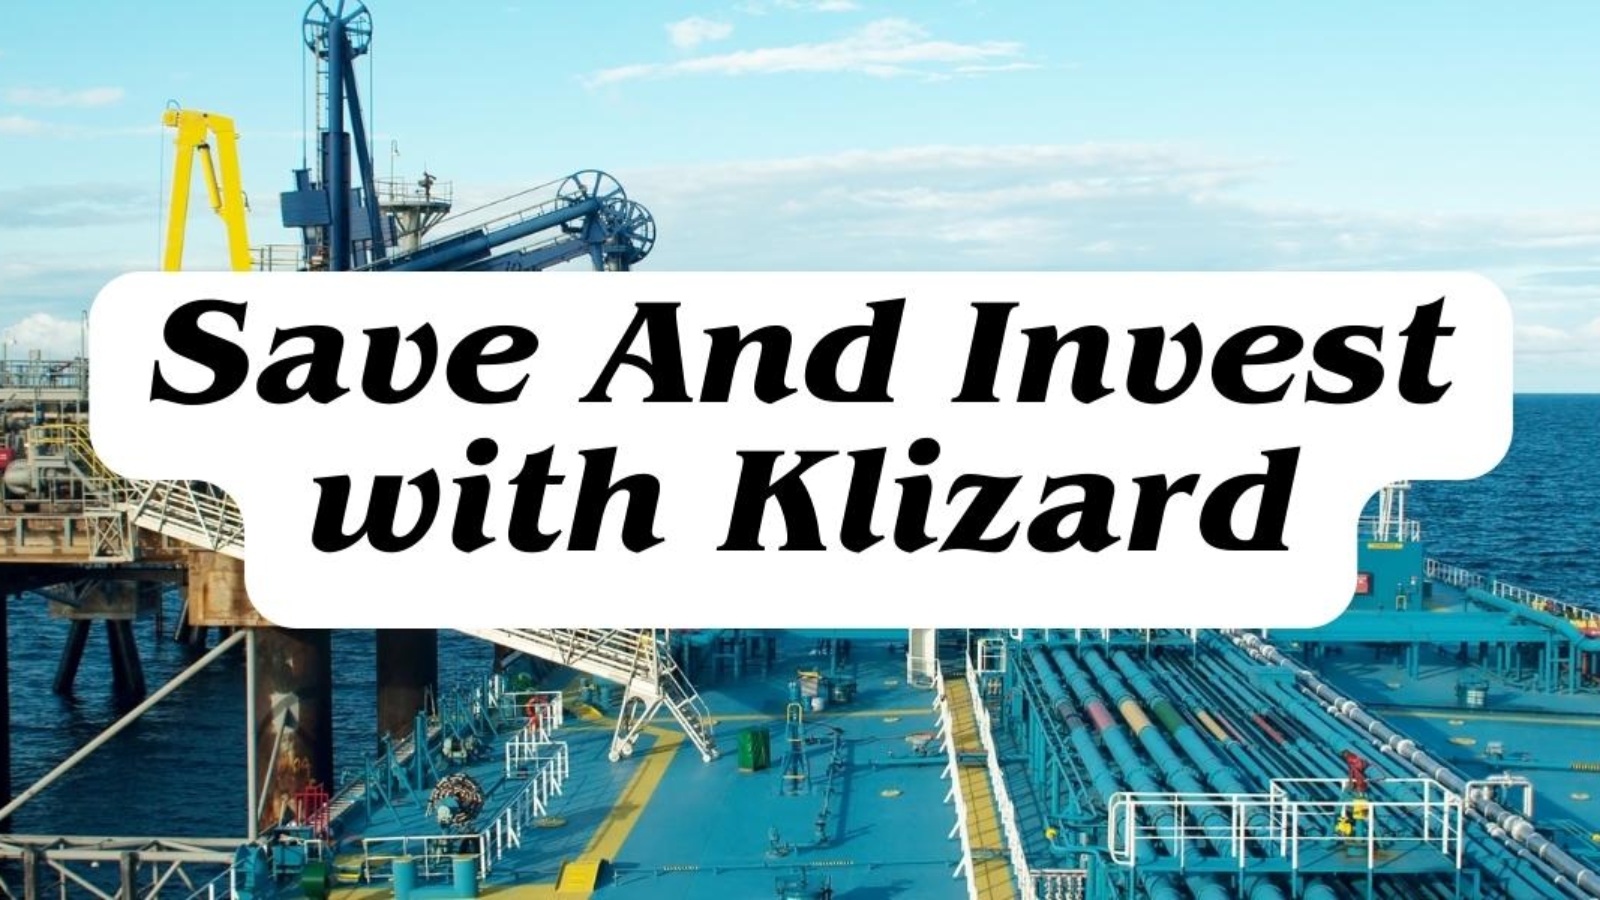 Save And Invest with Klizard